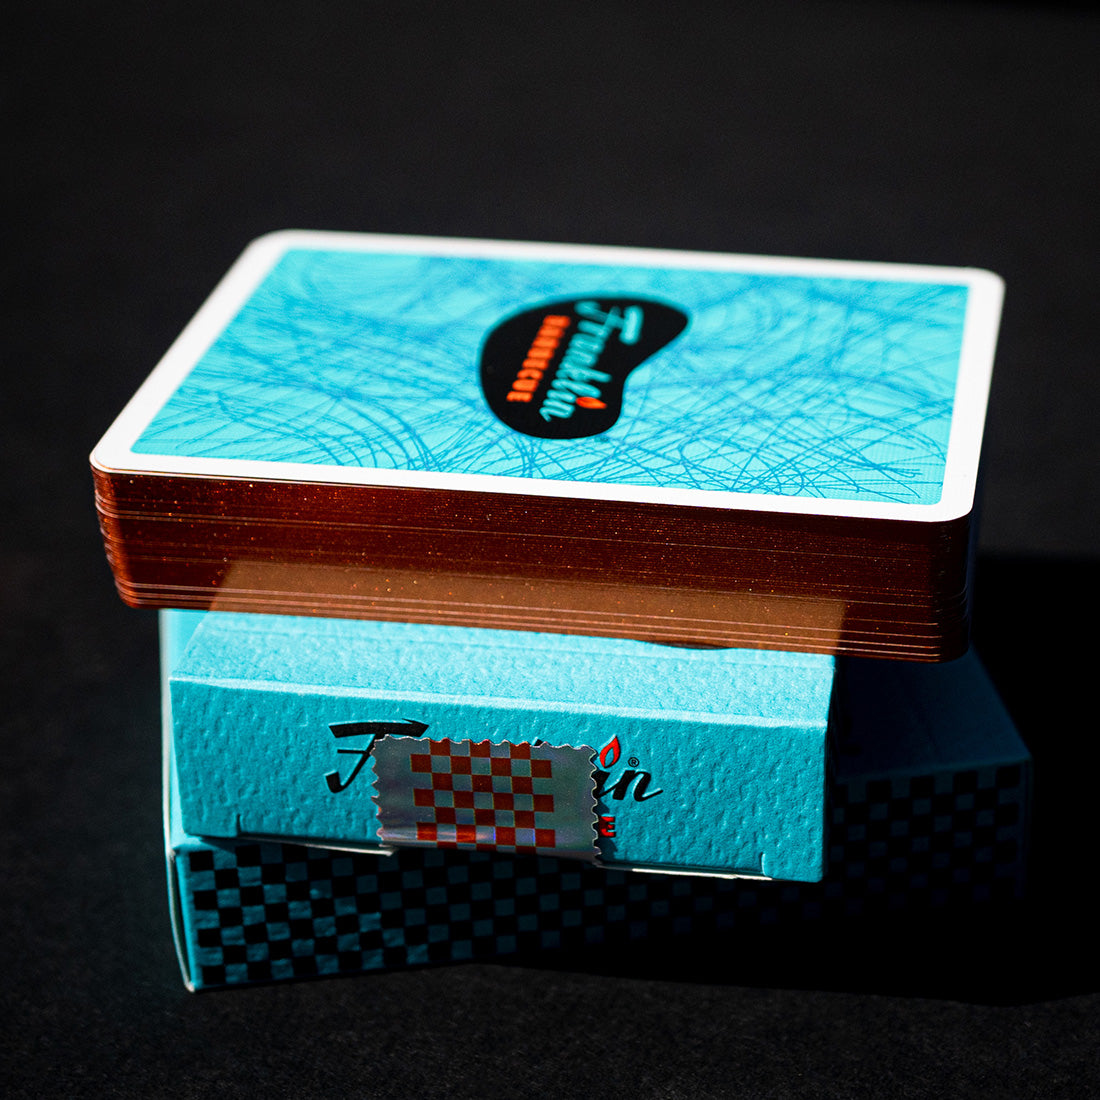 ORANGE GILDED LIMITED EDITION FRANKLIN BBQ OFFICIAL PLAYING CARDS